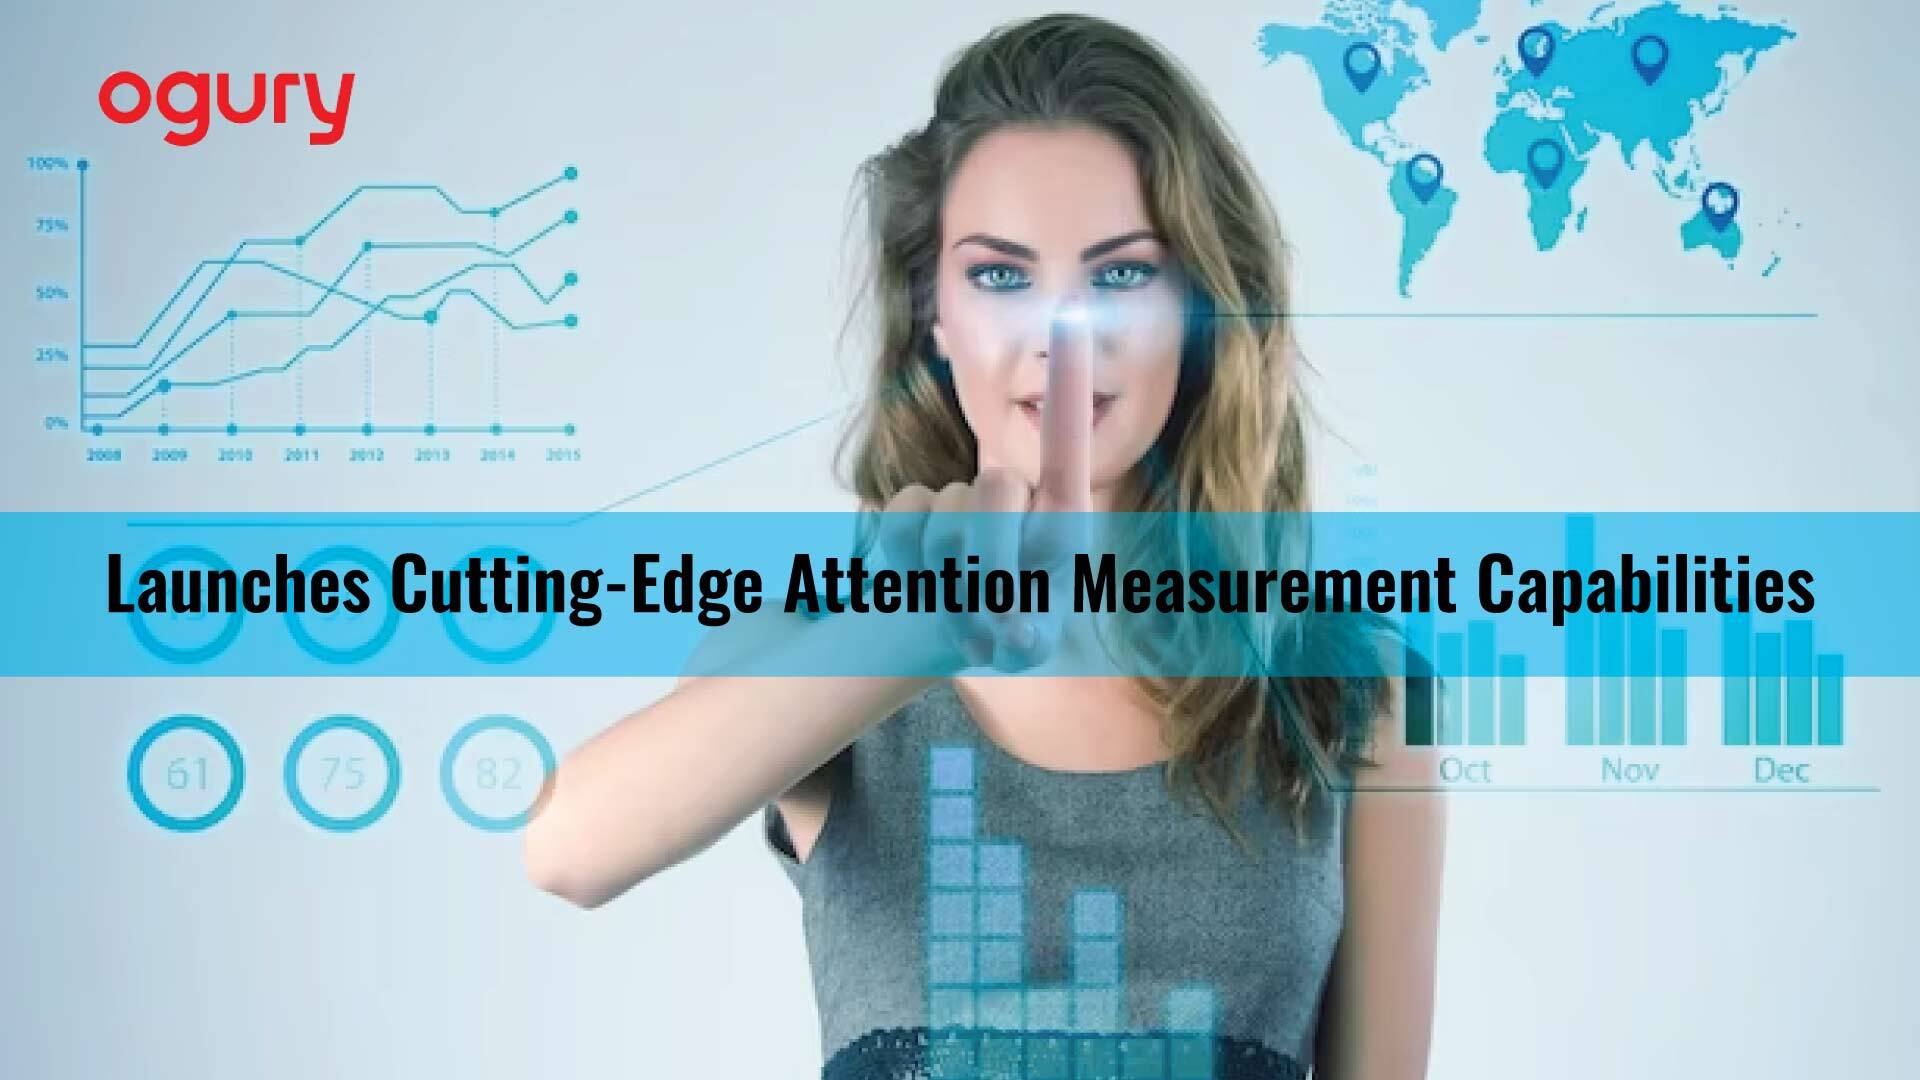 Beyond viewability: Ogury launches cutting-edge attention measurement capabilities